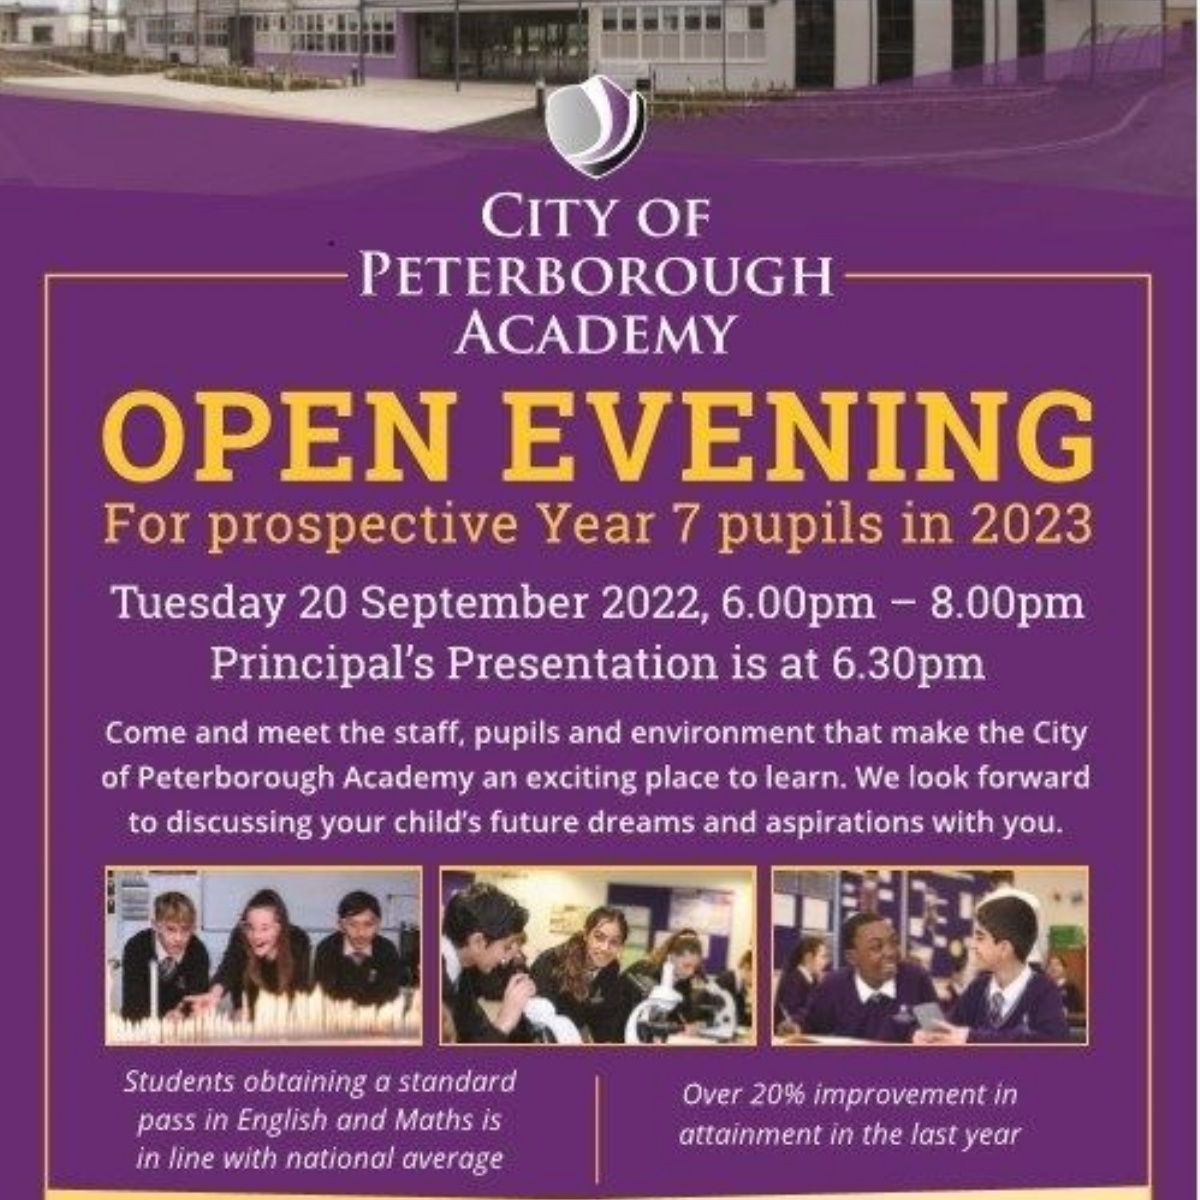 City of Peterborough Academy Open Evening Tuesday 20 September 6pm